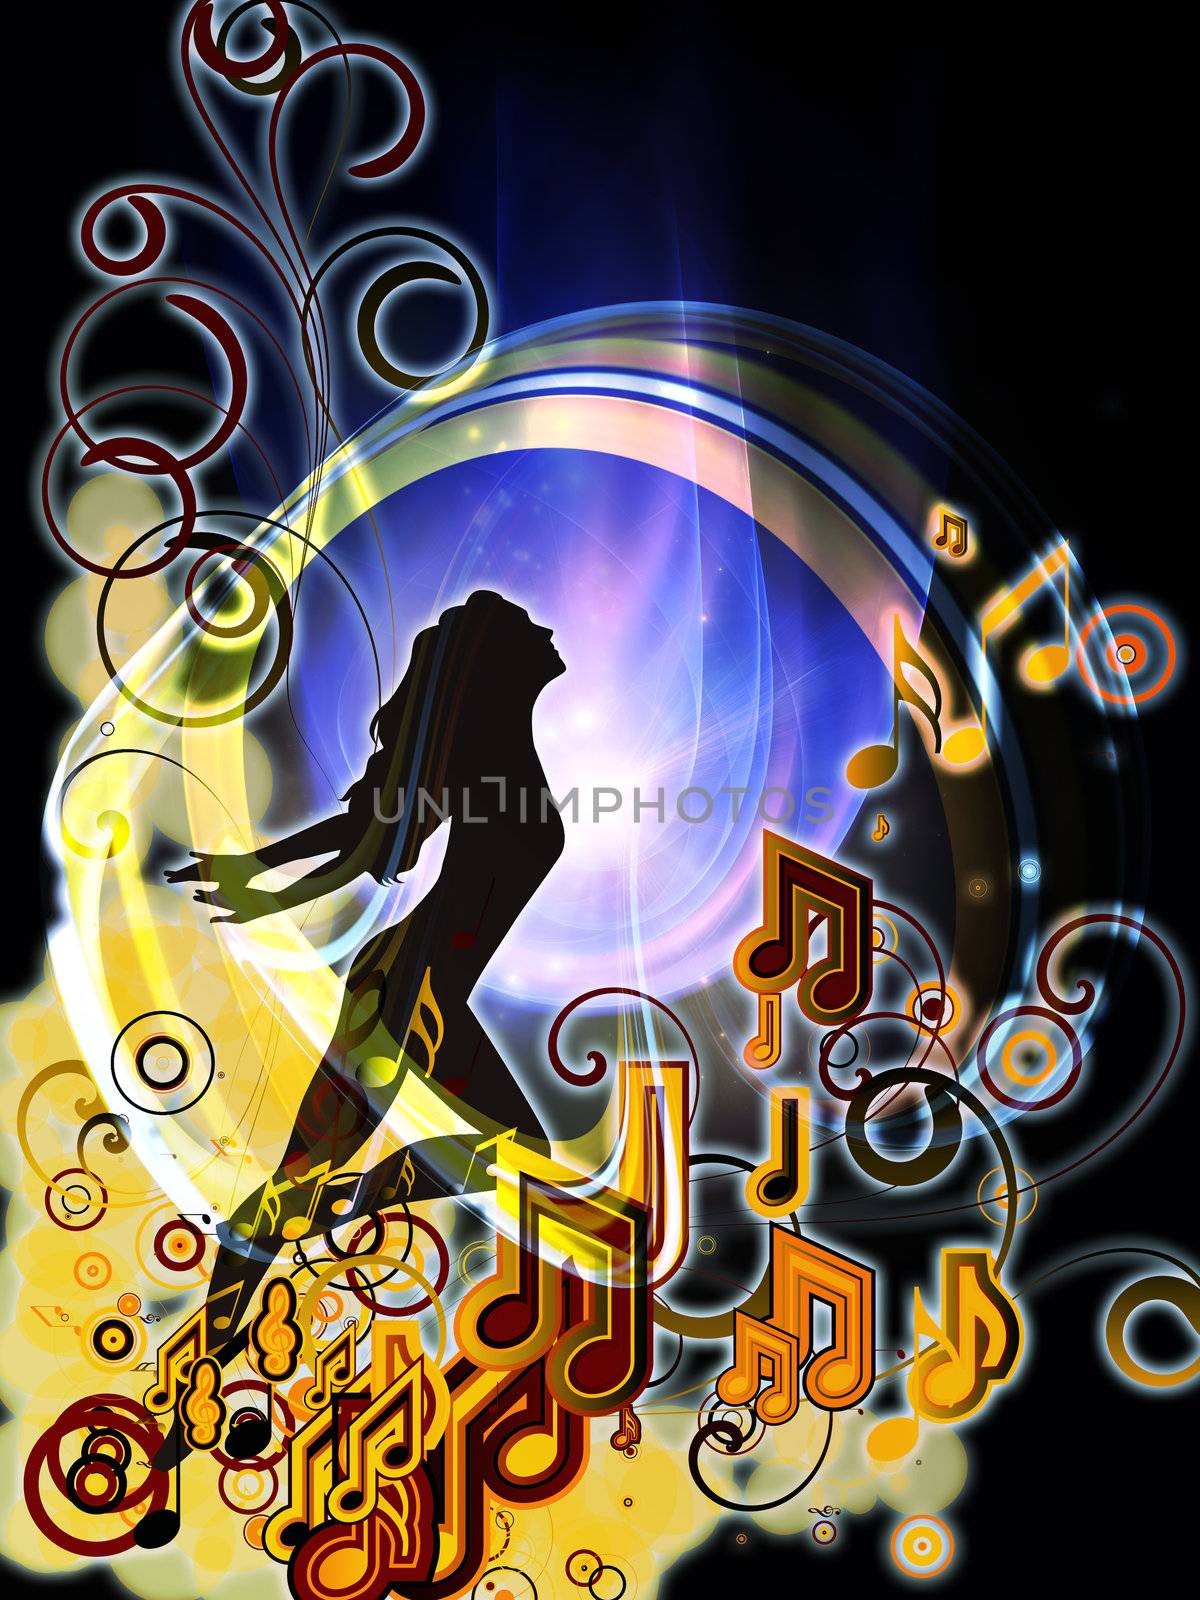 Composition of girl silhouette, notes, lights and abstract design elements with metaphorical relationship to music, song, performance and dance